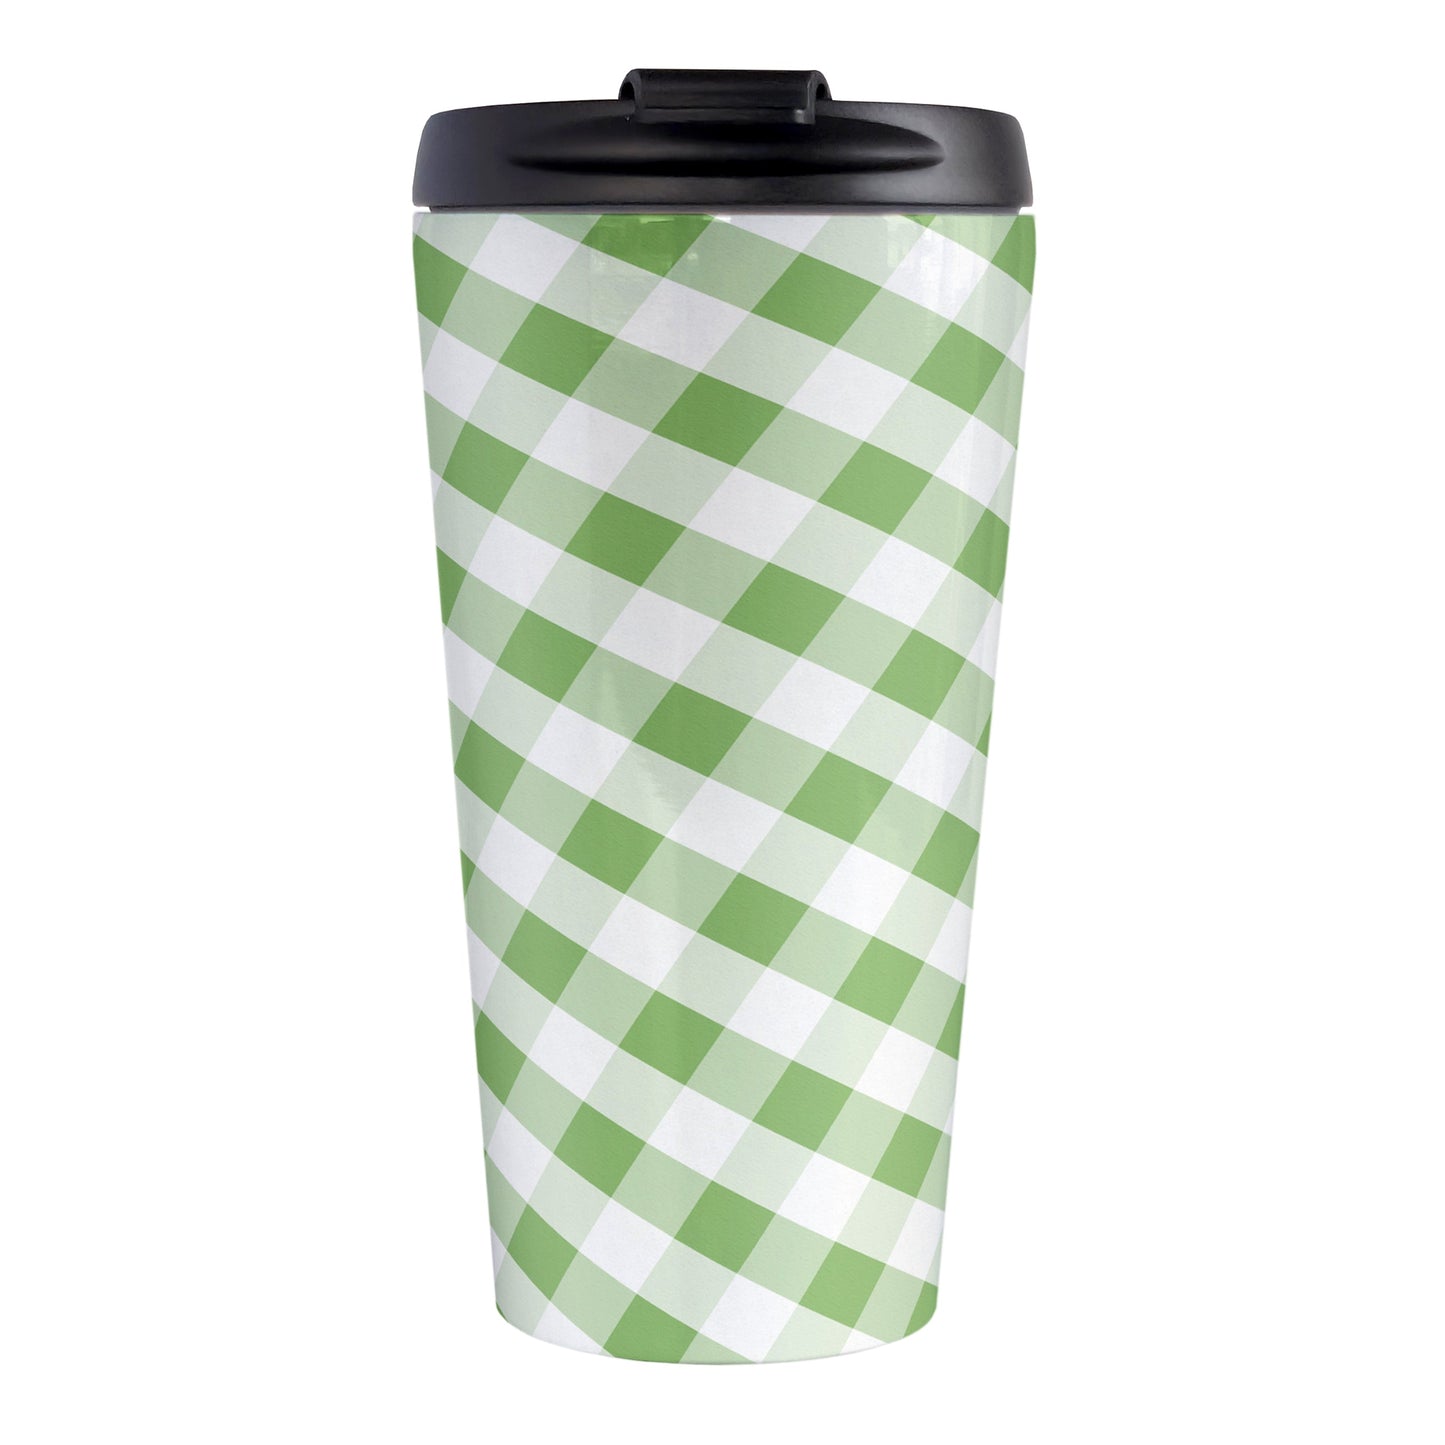 Green Gingham Travel Mug (15oz, stainless steel insulated) at Amy's Coffee Mugs. A travel mug designed with a slanted green and white gingham pattern that wraps around the travel mug.